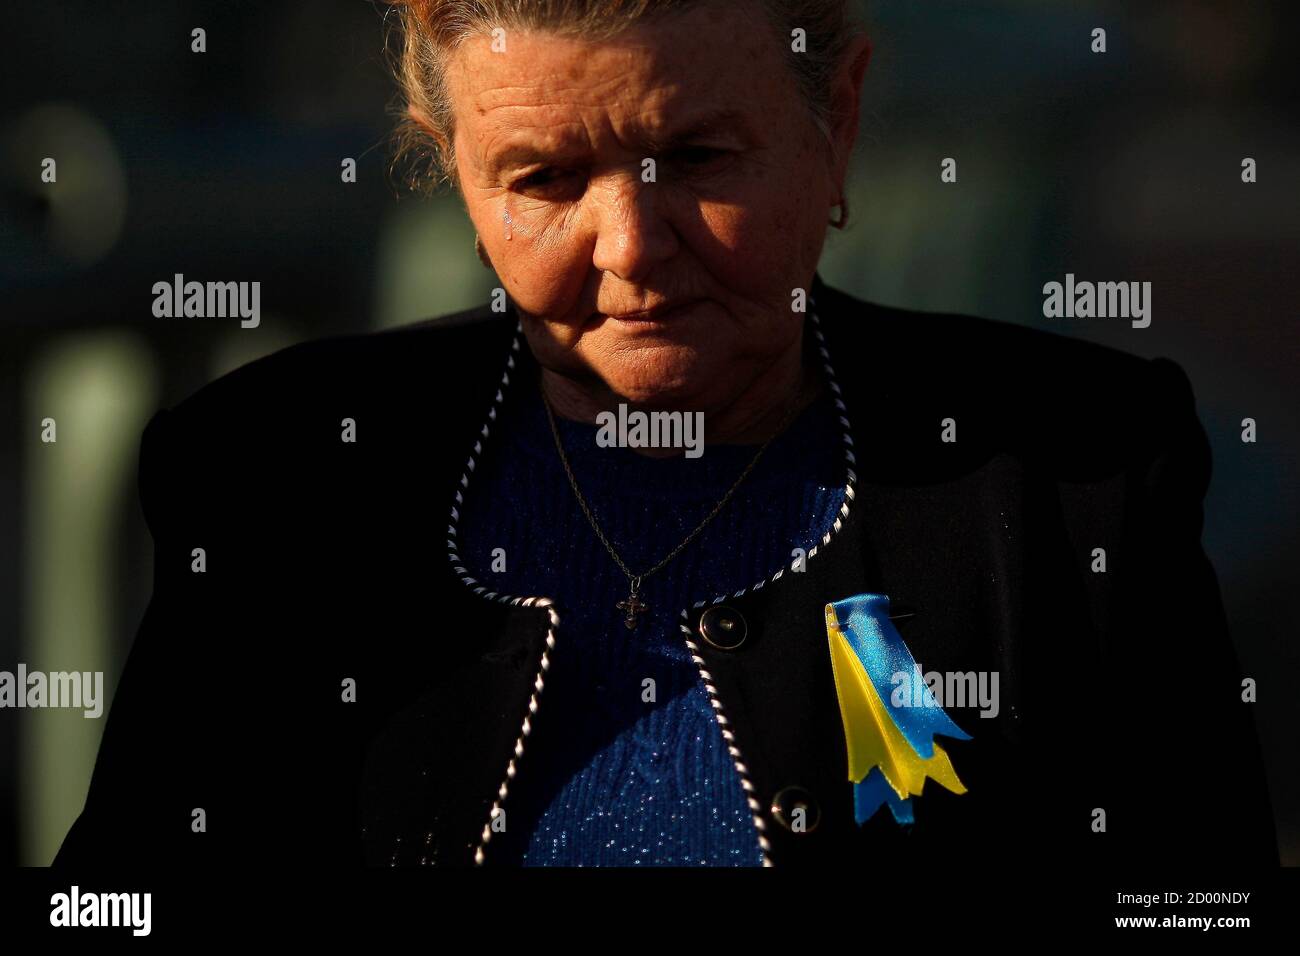 A Ukrainian woman living in Malaga cries during a protest against Russian President Vladimir Putin and in favor of unity and democratic freedom in Ukraine, in downtown Malaga, southern Spain, March 16, 2014. France on Sunday demanded Russia immediately take measures to reduce 'pointless and dangerous' tensions in Ukraine, calling the secession referendum held in the Crimea region illegal. REUTERS/Jon Nazca (SPAIN - Tags: POLITICS CIVIL UNREST ELECTIONS) Stock Photo